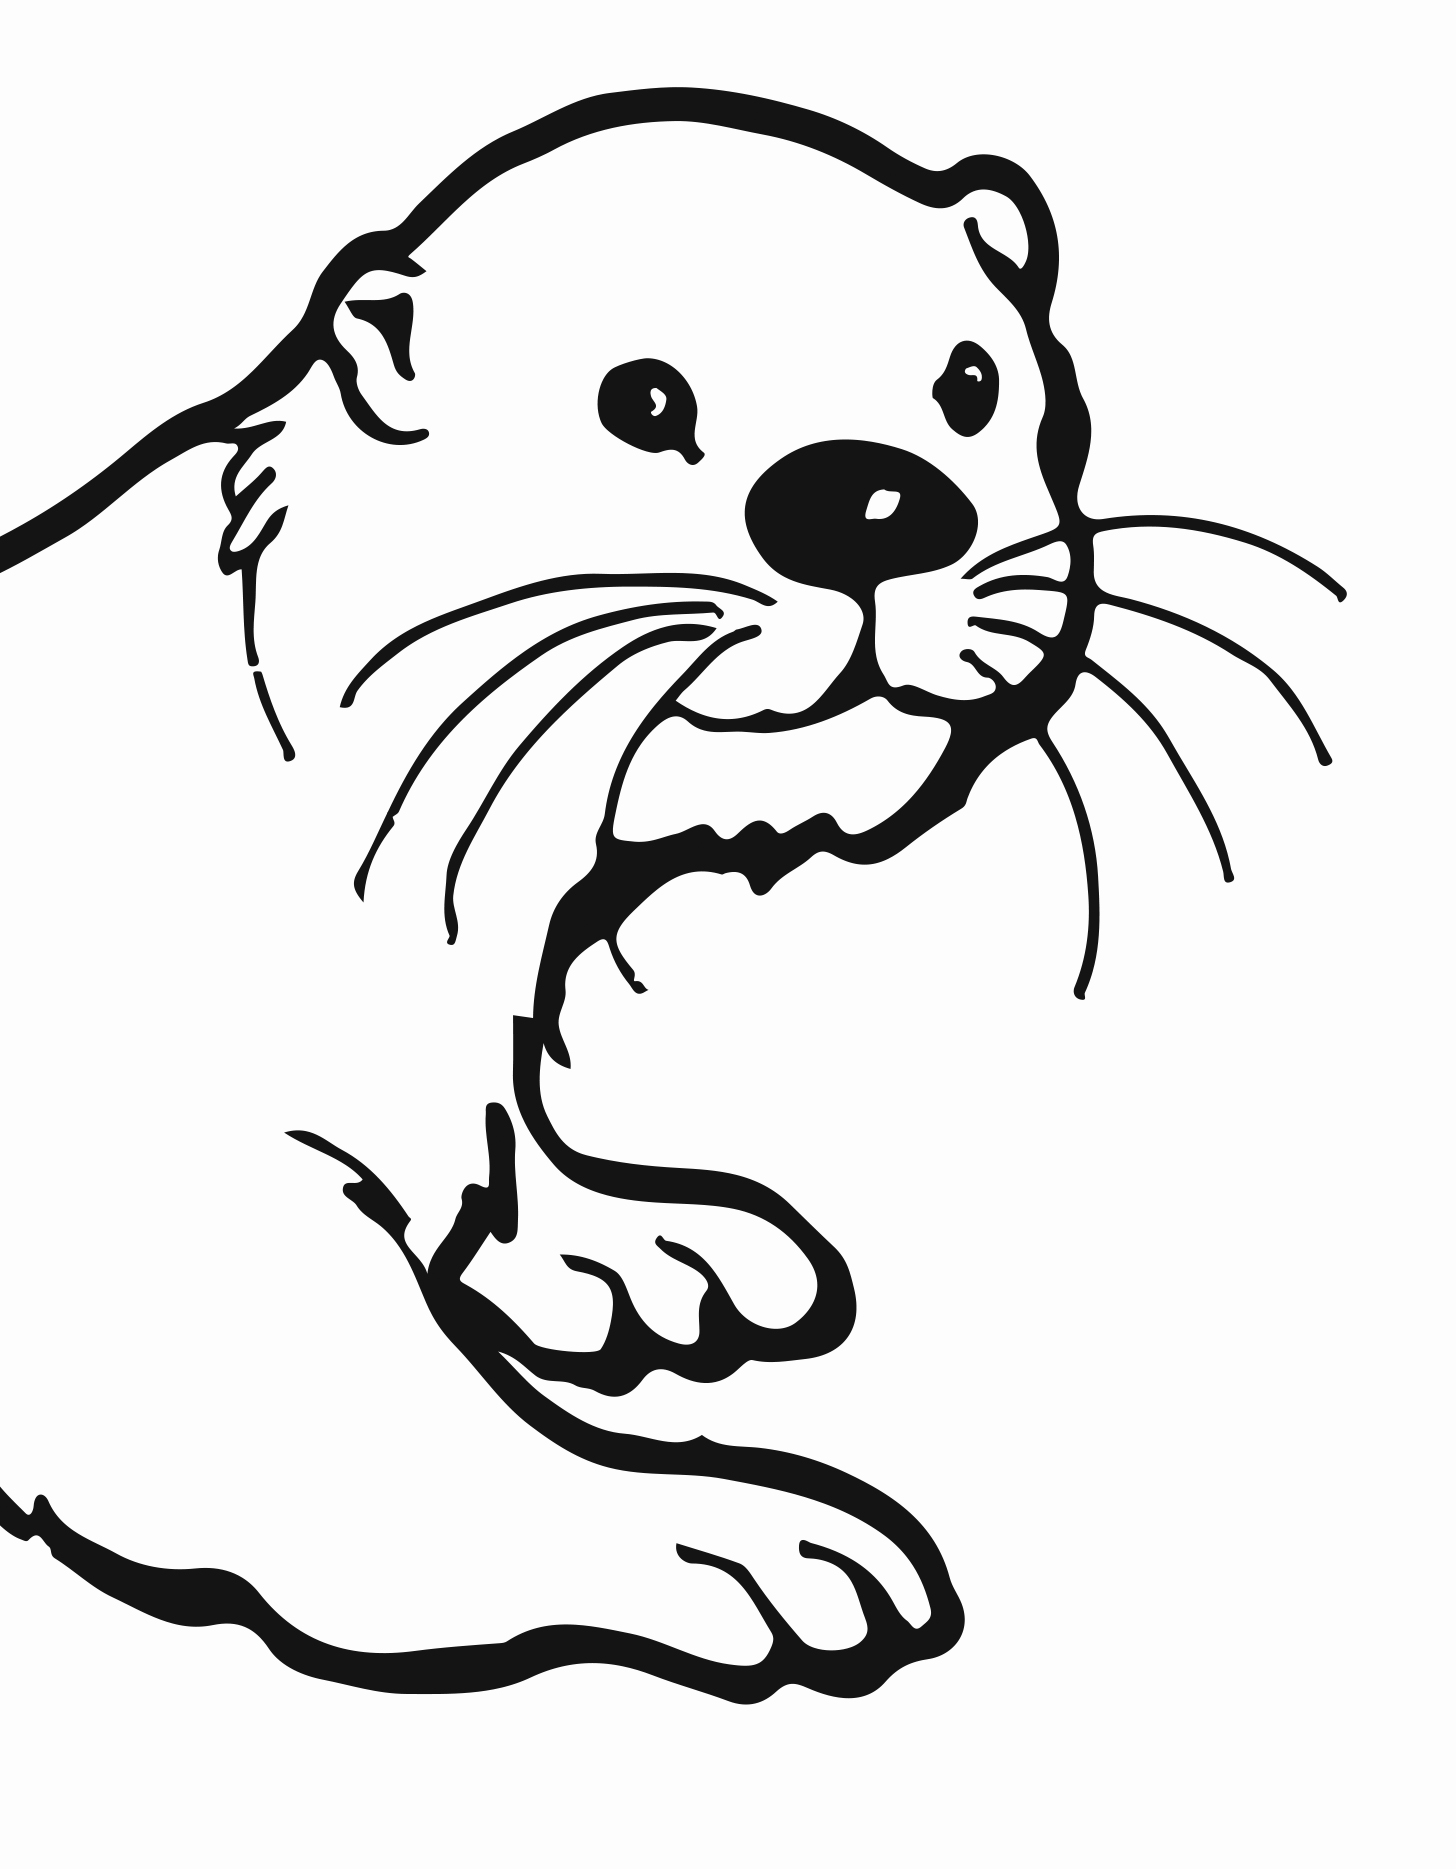 Black And White Sea Otter Pictures | Free download on ClipArtMag